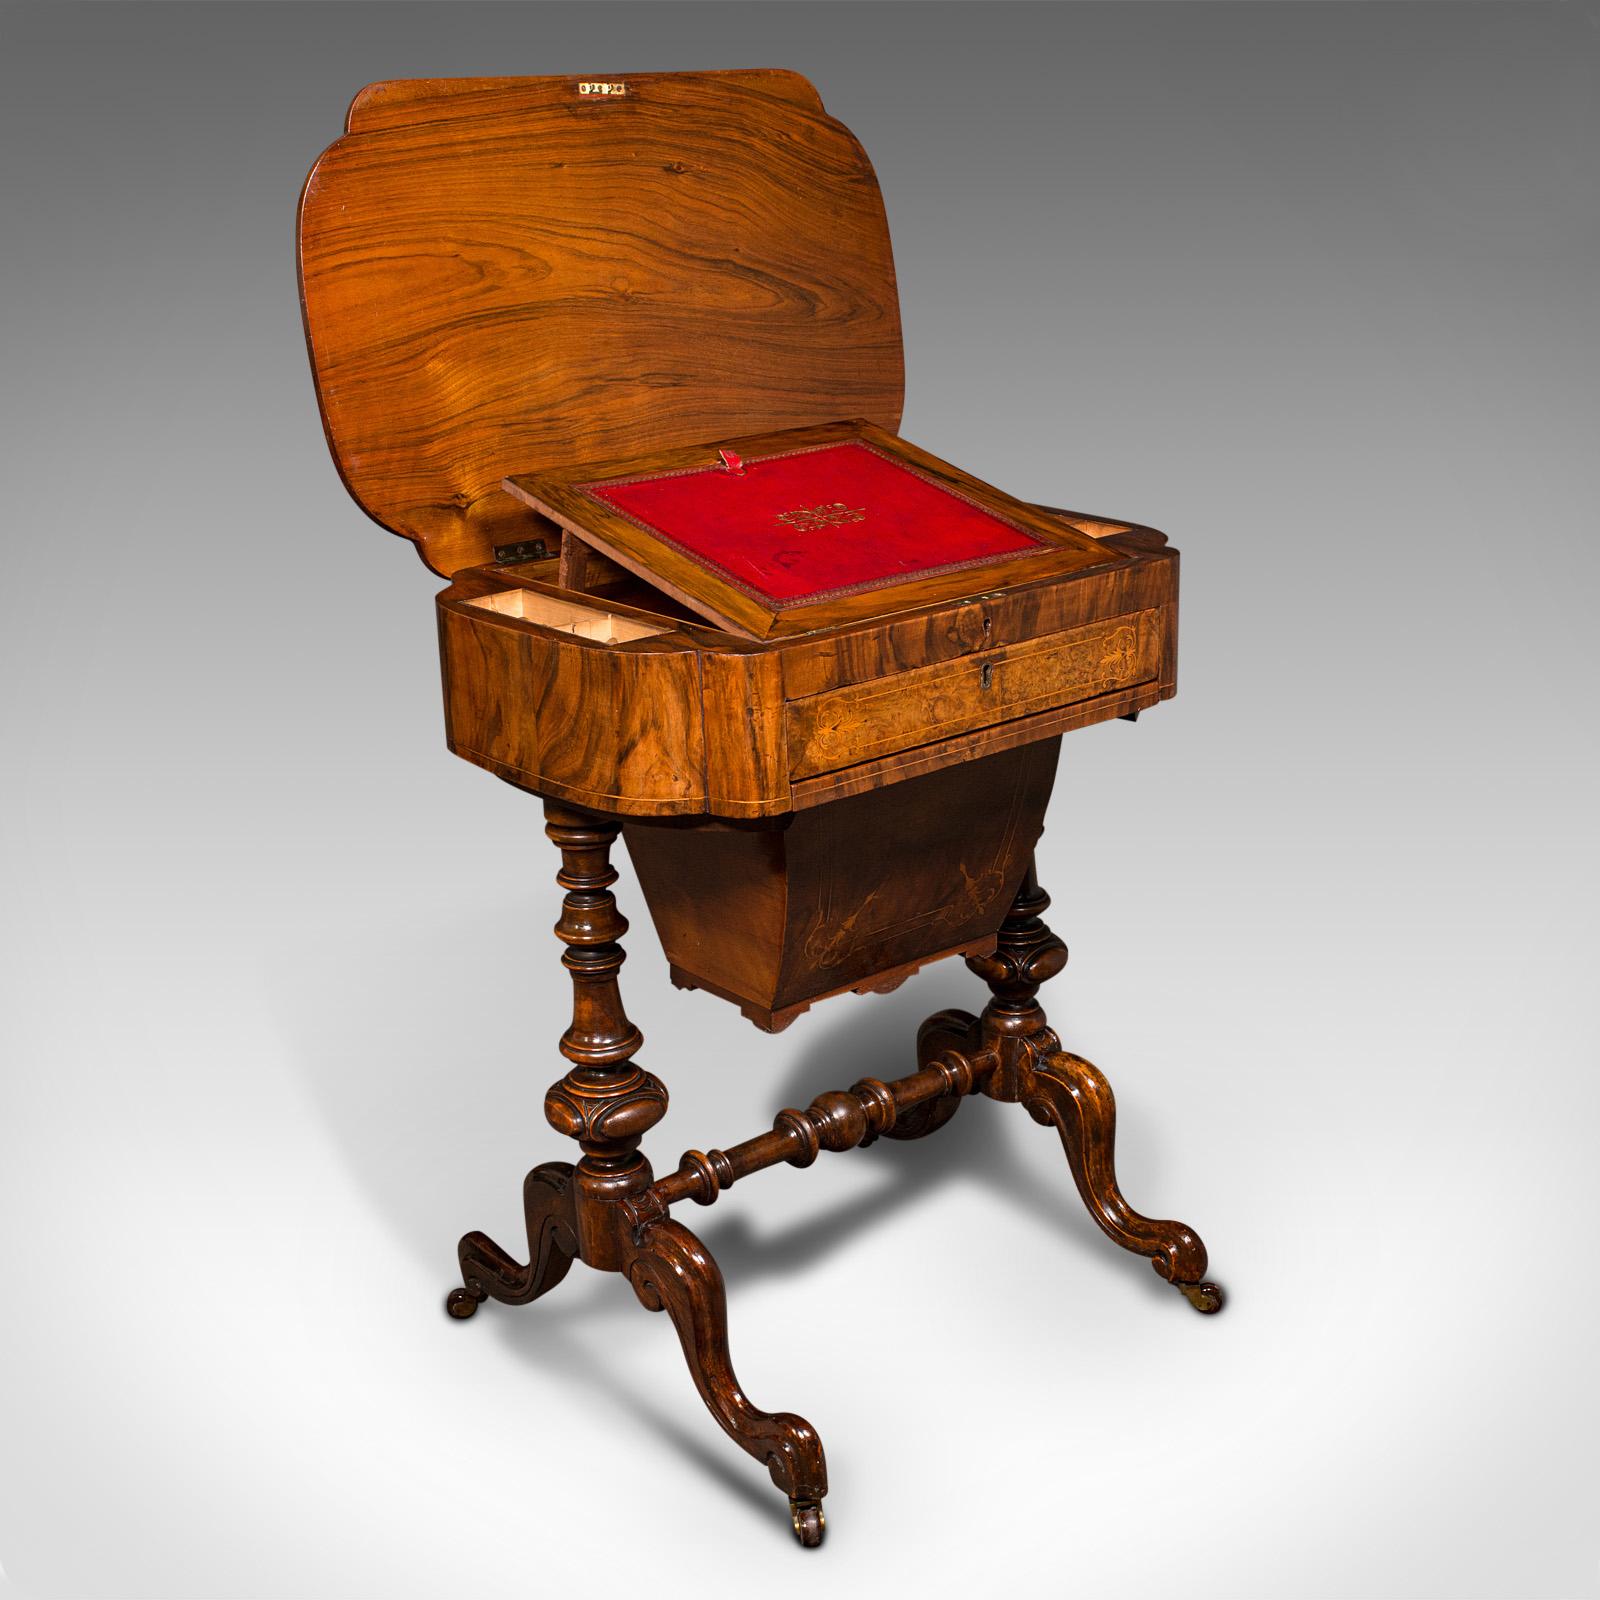 This is an antique lady of the house work table. An English, burr walnut and leather writing or sewing table by Waring & Gillow, dating to the late Victorian period, circa 1900.

Delightfully presented table with striking figuring and